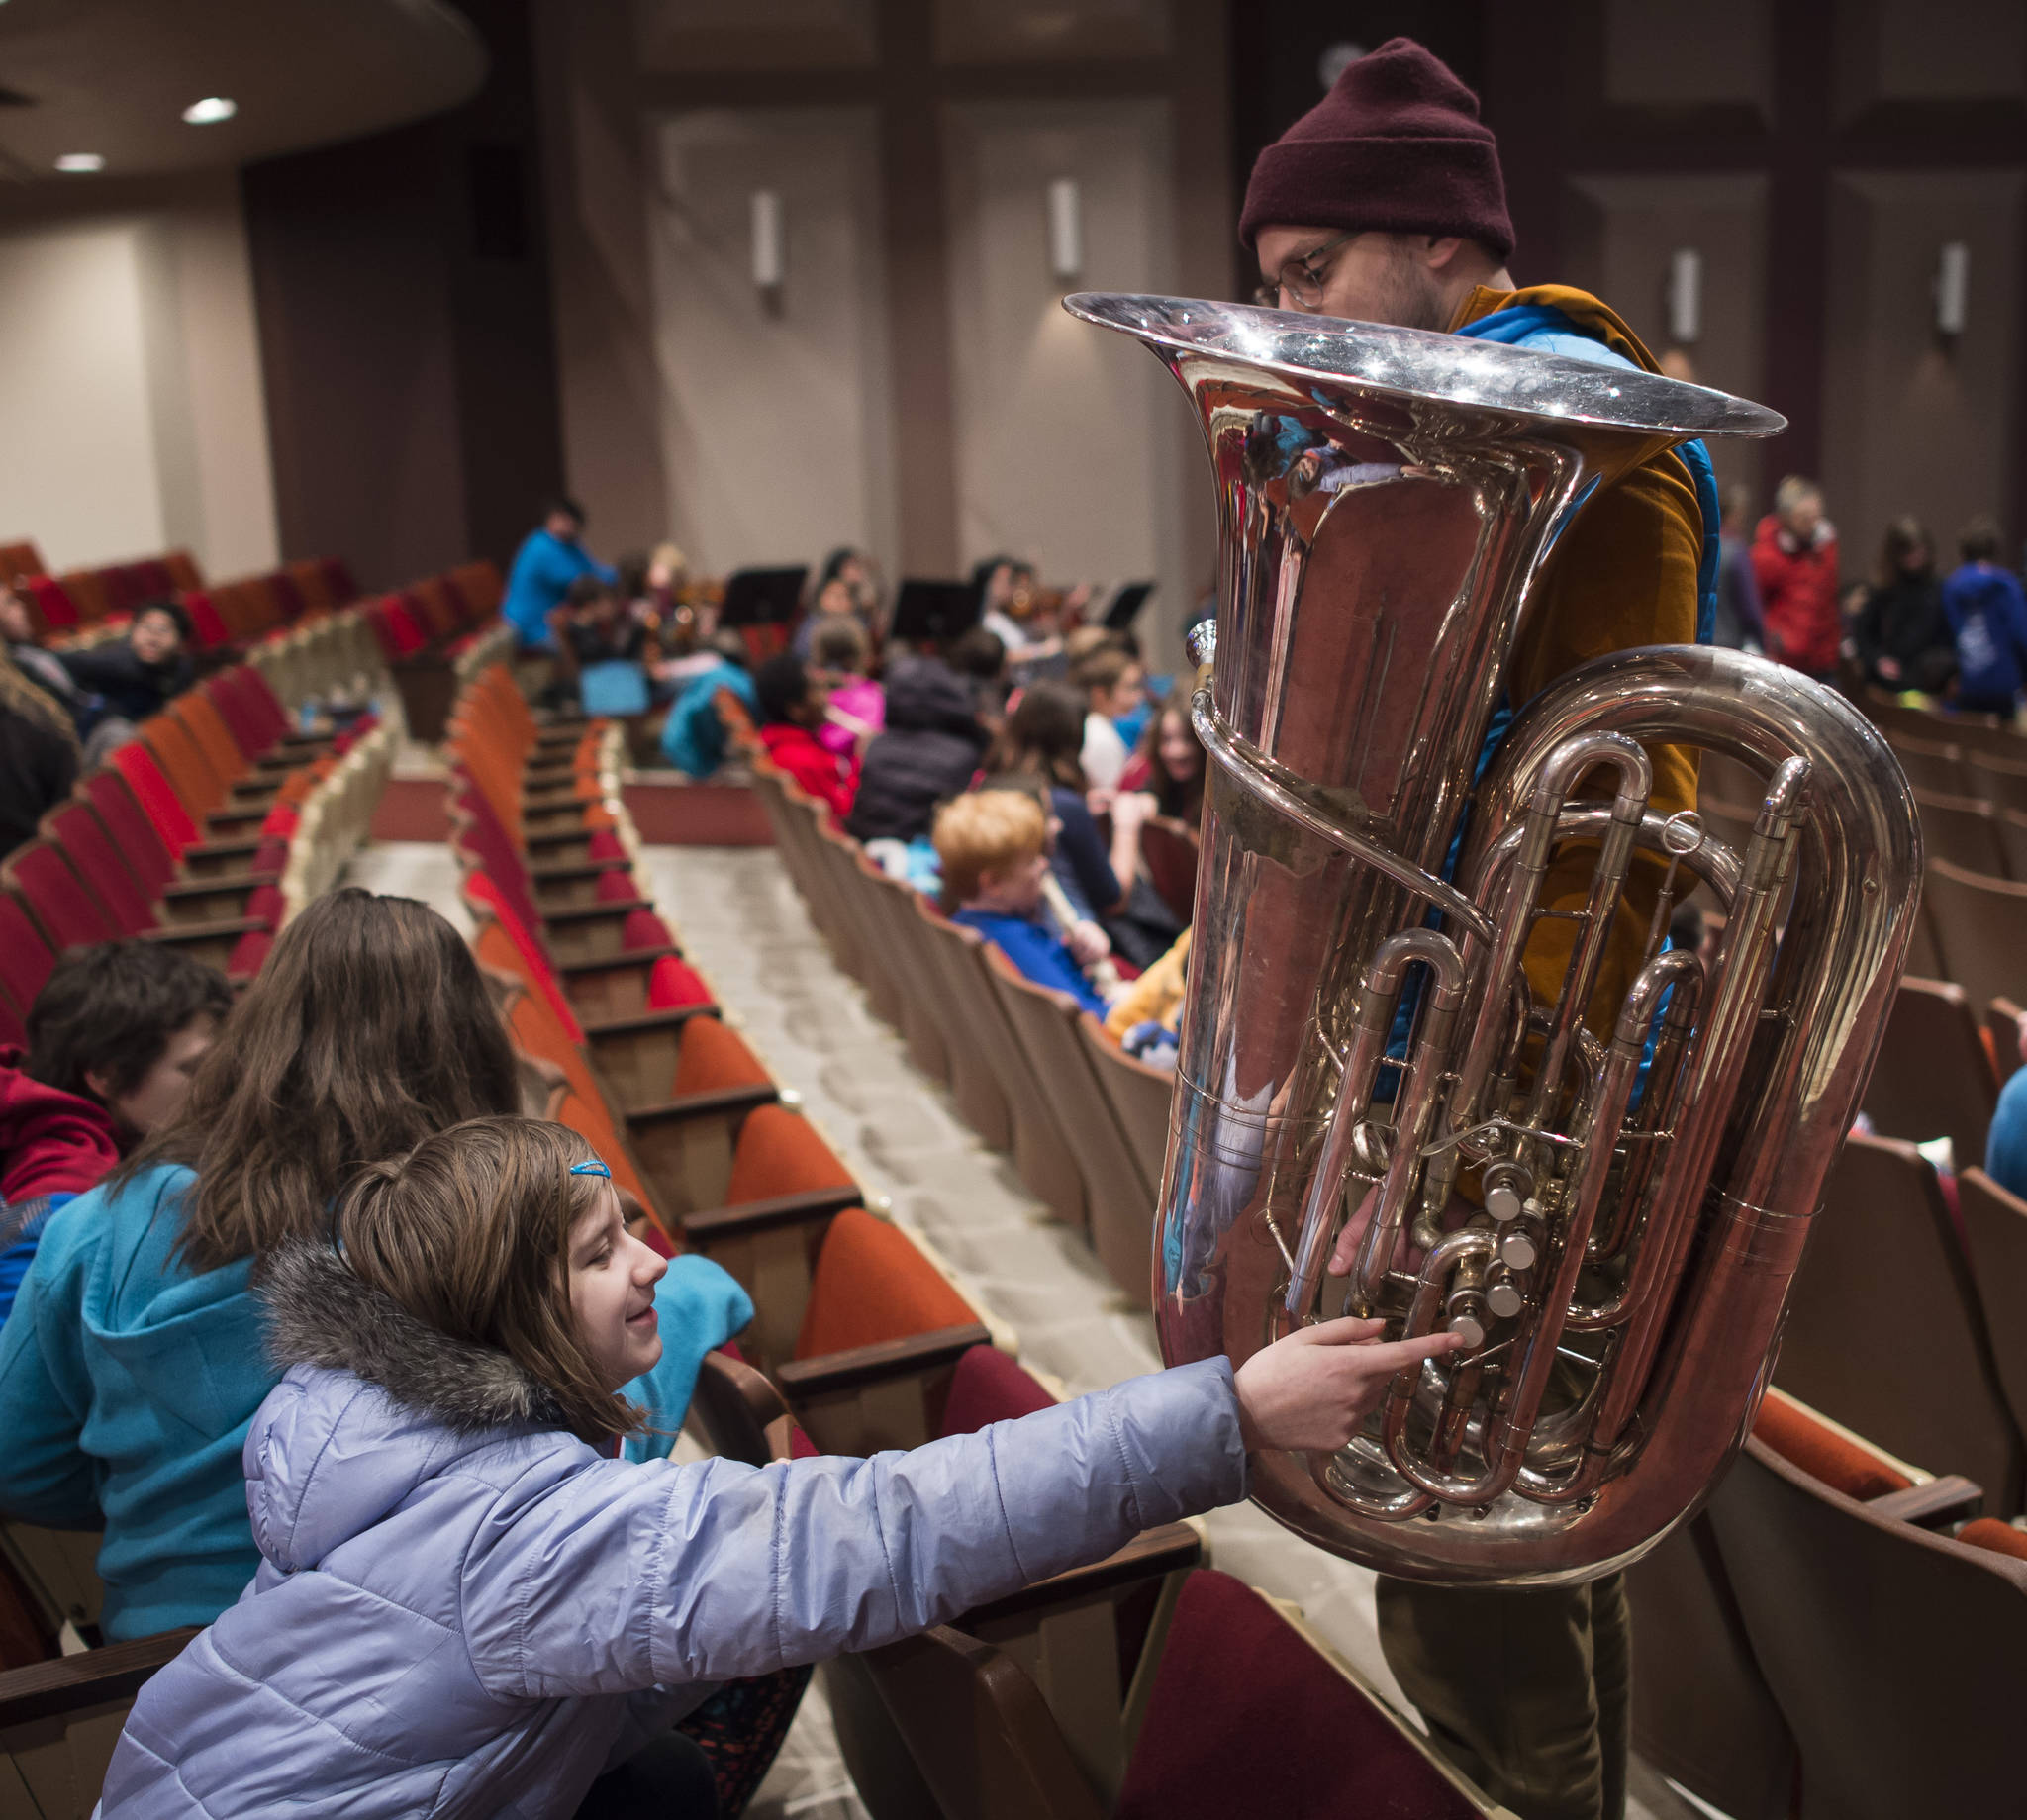 Riverbend Elementary School fifth-grader Sofia Lindoff gets a closeup view of Stephen Young’s tuba as Juneau School District fifth-graders attend a program by the Juneau Symphony Orchestra and Conductor Troy Quinn titled “The Orchestra Sings!” in the Juneau-Douglas High School Auditorium on Friday, Jan. 26, 2018. The Symphony Excursion for 5th Grade is part of Juneau’s ANY GIVEN CHILD programming. (Michael Penn | Juneau Empire)